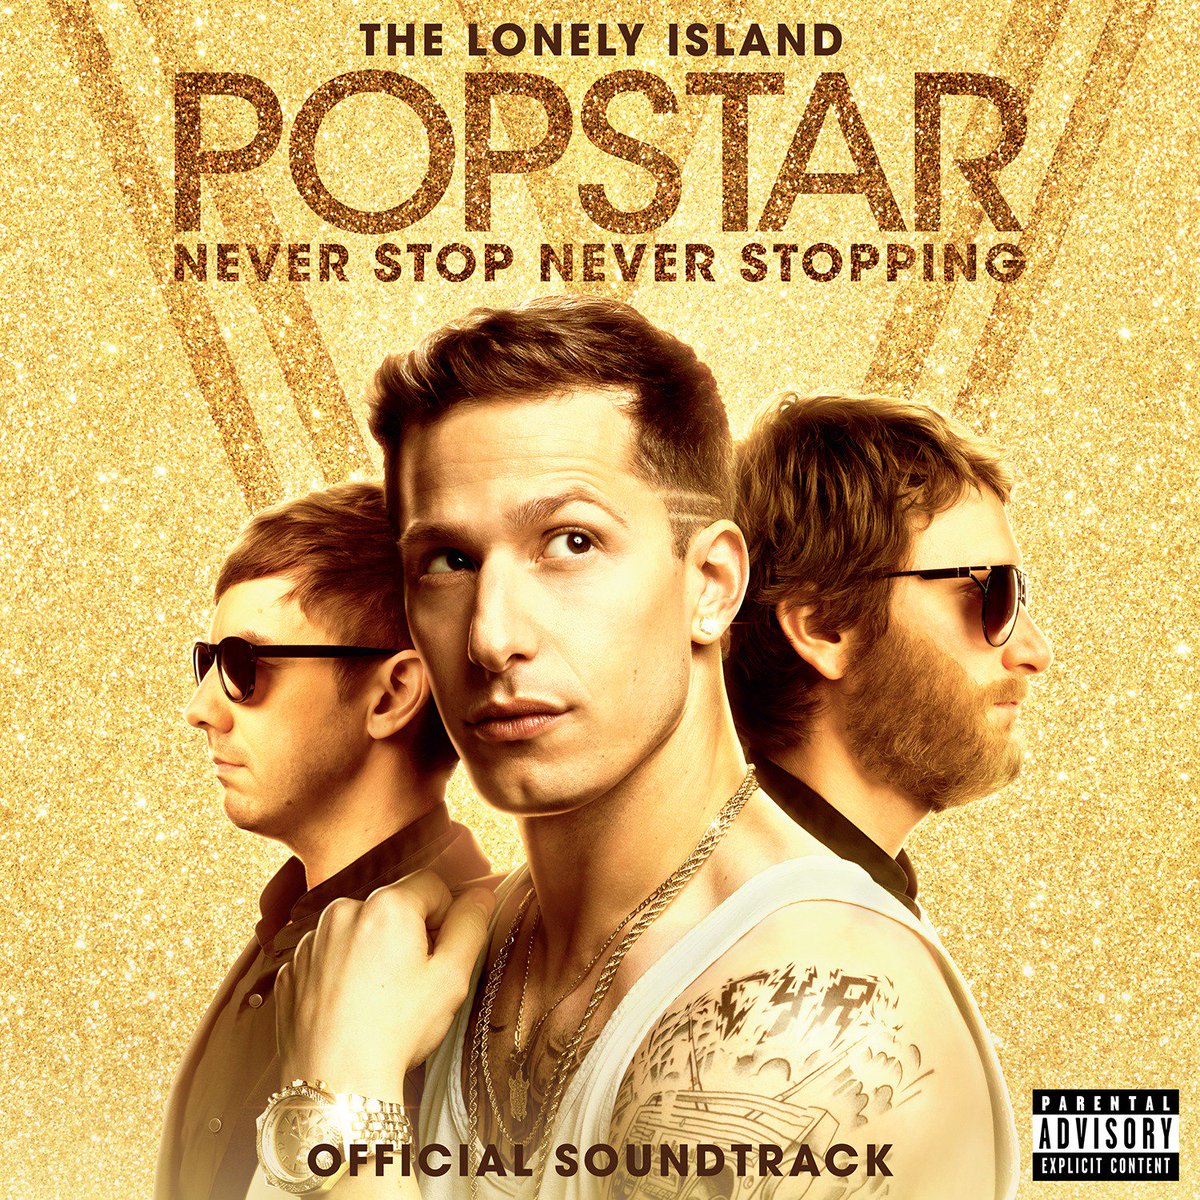 Preorder the soundtrack for Popstar: Never Stop Never Stopping feat. 